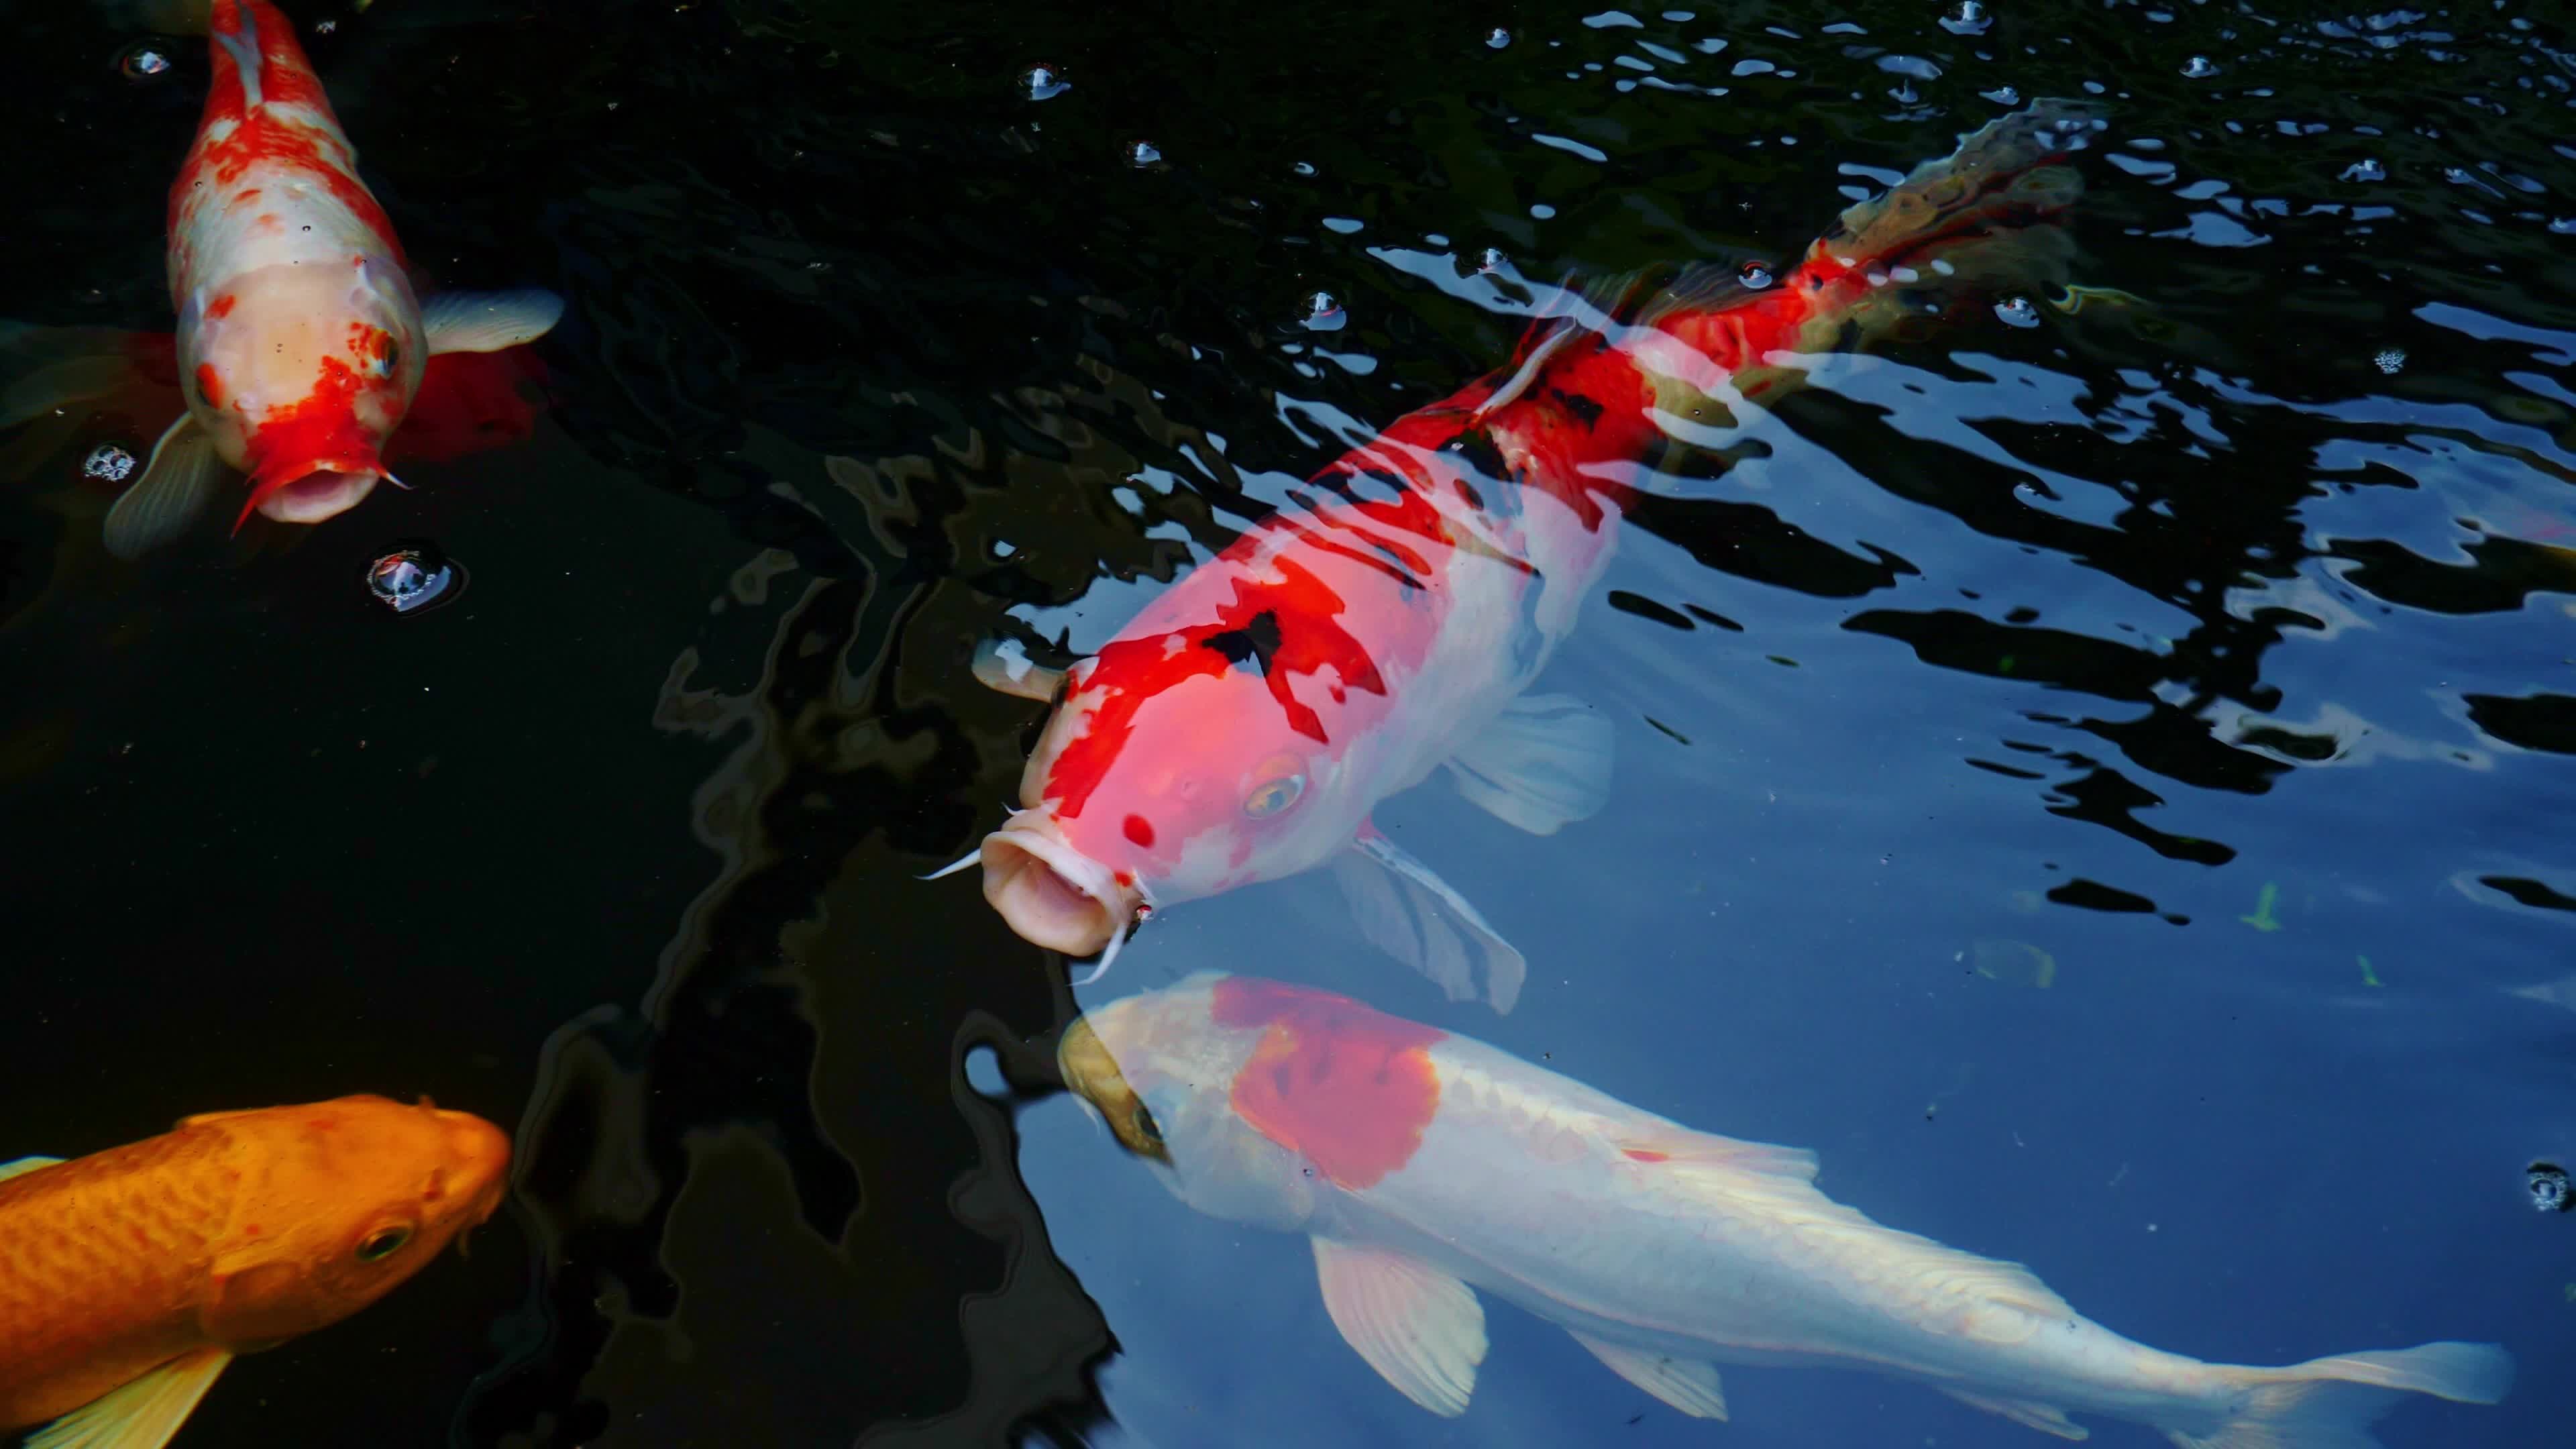 Taming fancy fish, Outdoor koi pond, Asian pet beauty, Relaxation and feng shui, 3840x2160 4K Desktop